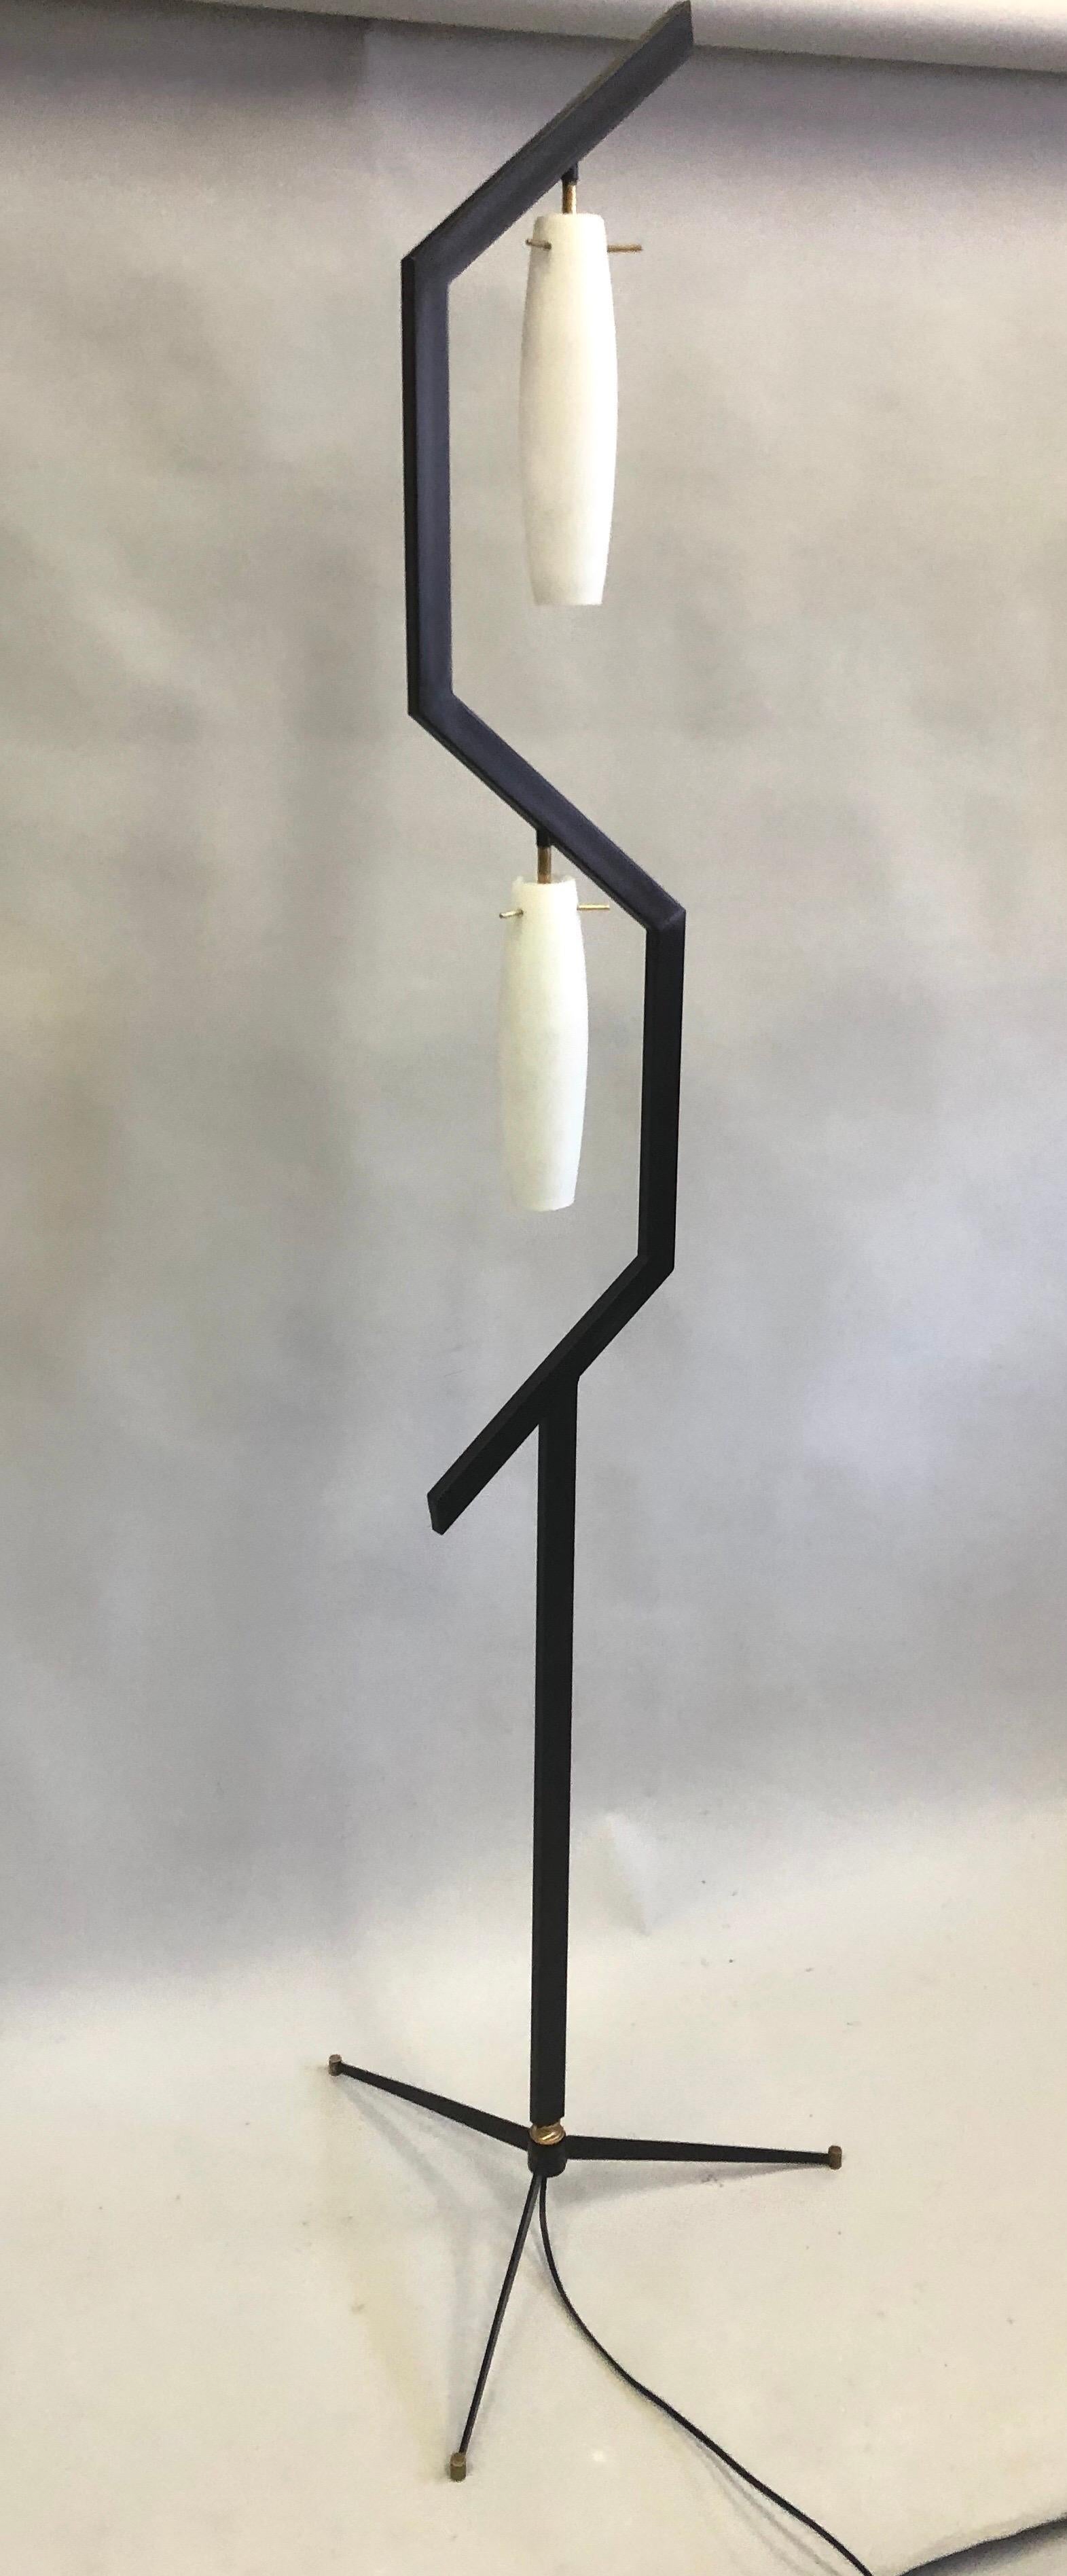 Rare and exceptional Italian Mid-Century Modern floor lamp in the style of Angelo Lelli for Arredoluce. The entire composition is ultra-modern / futurist in its conception; it's daring zig-zag form projects a sense of dynamic movement and forward